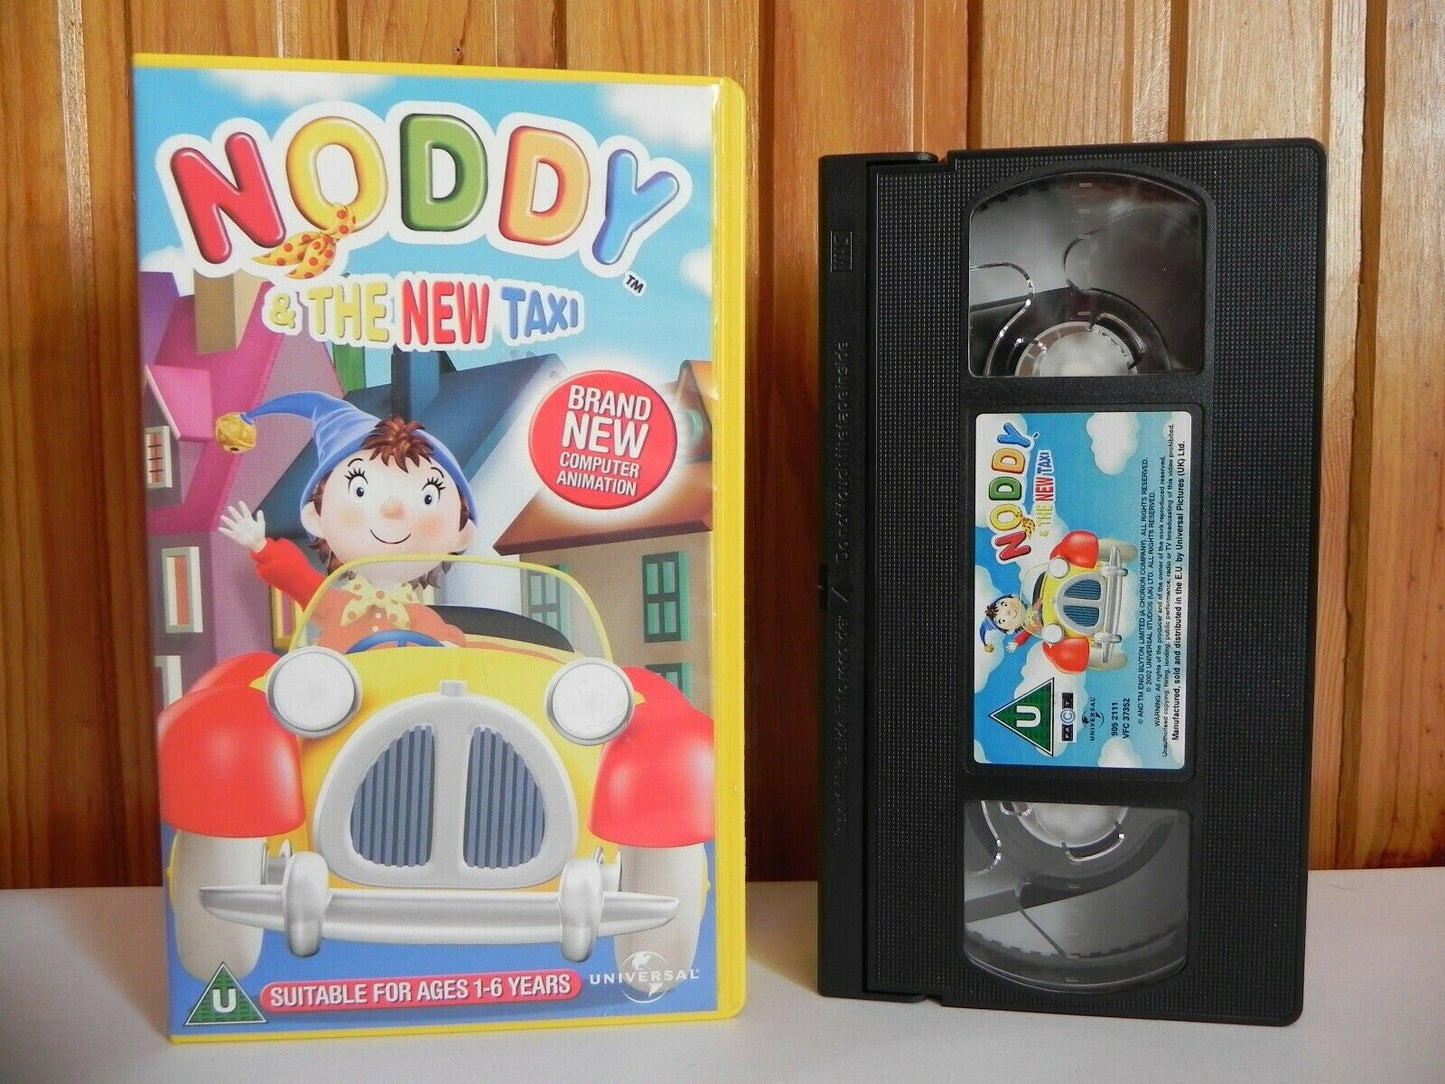 Noddy & The New Taxi - Universal - Brand New Computer Action - Children's - VHS-